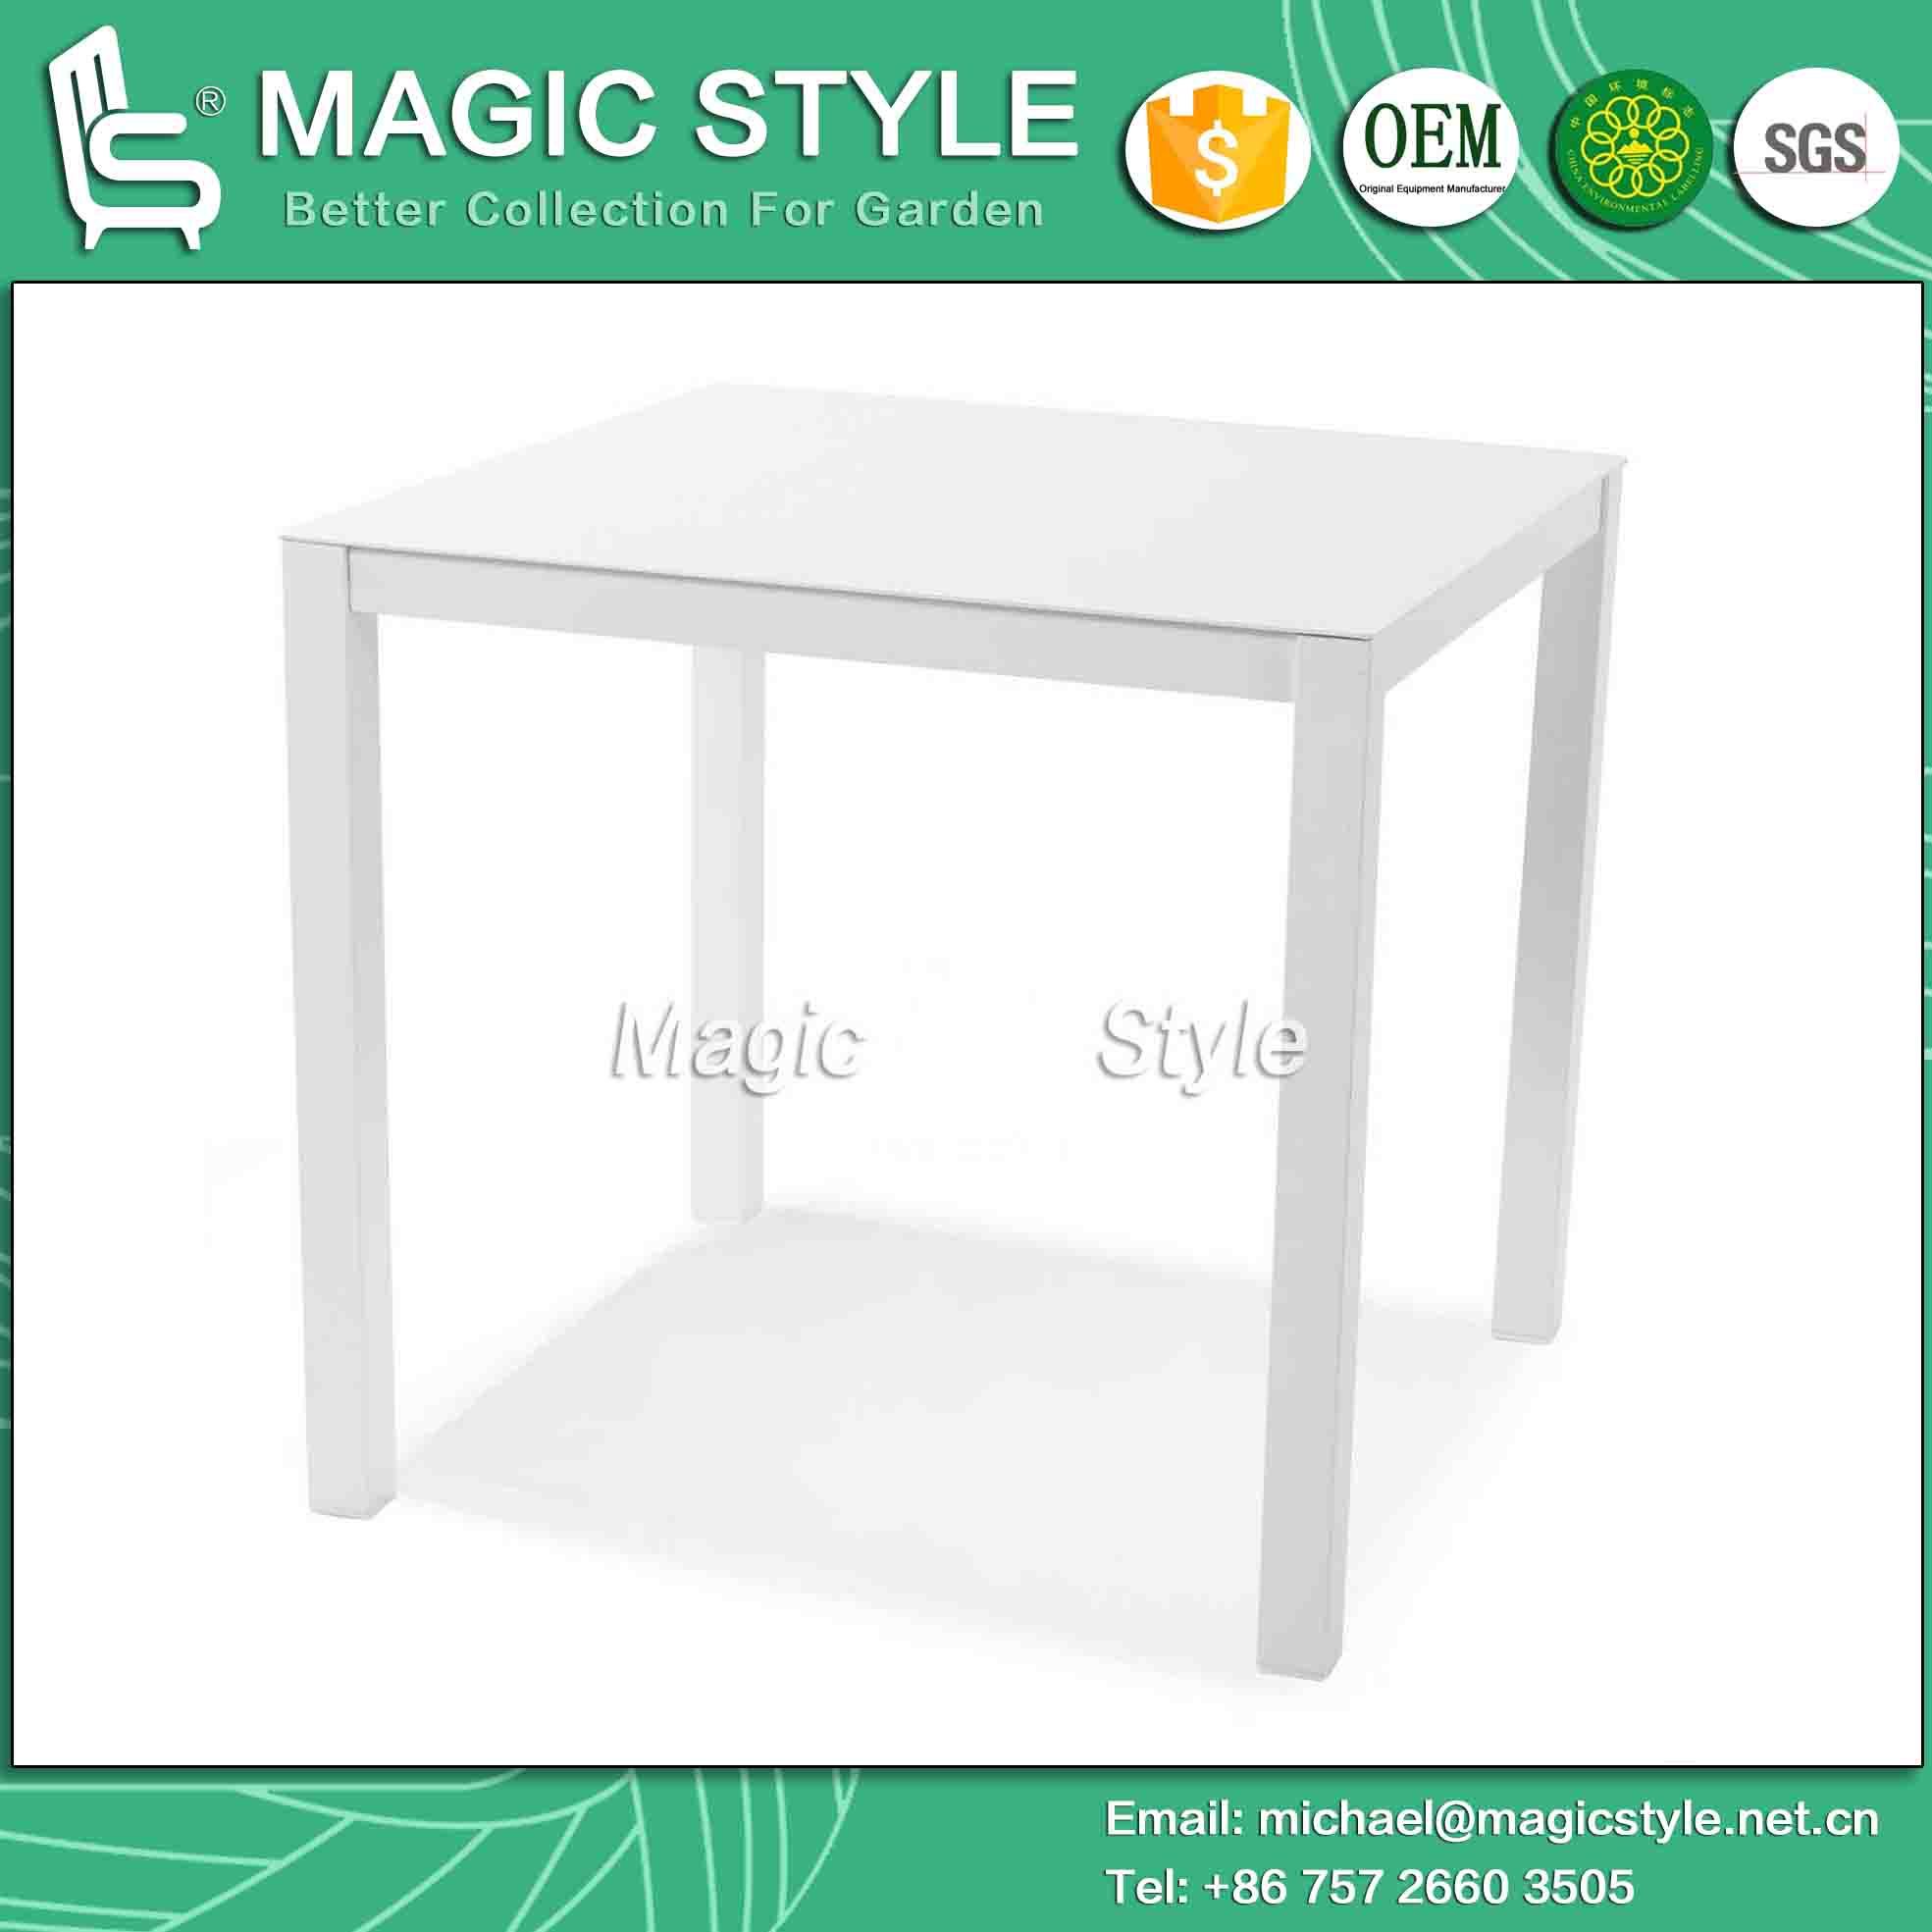 Aluminum Square Table Outdoor Dining Table Modern Dining Table (Magic Style)